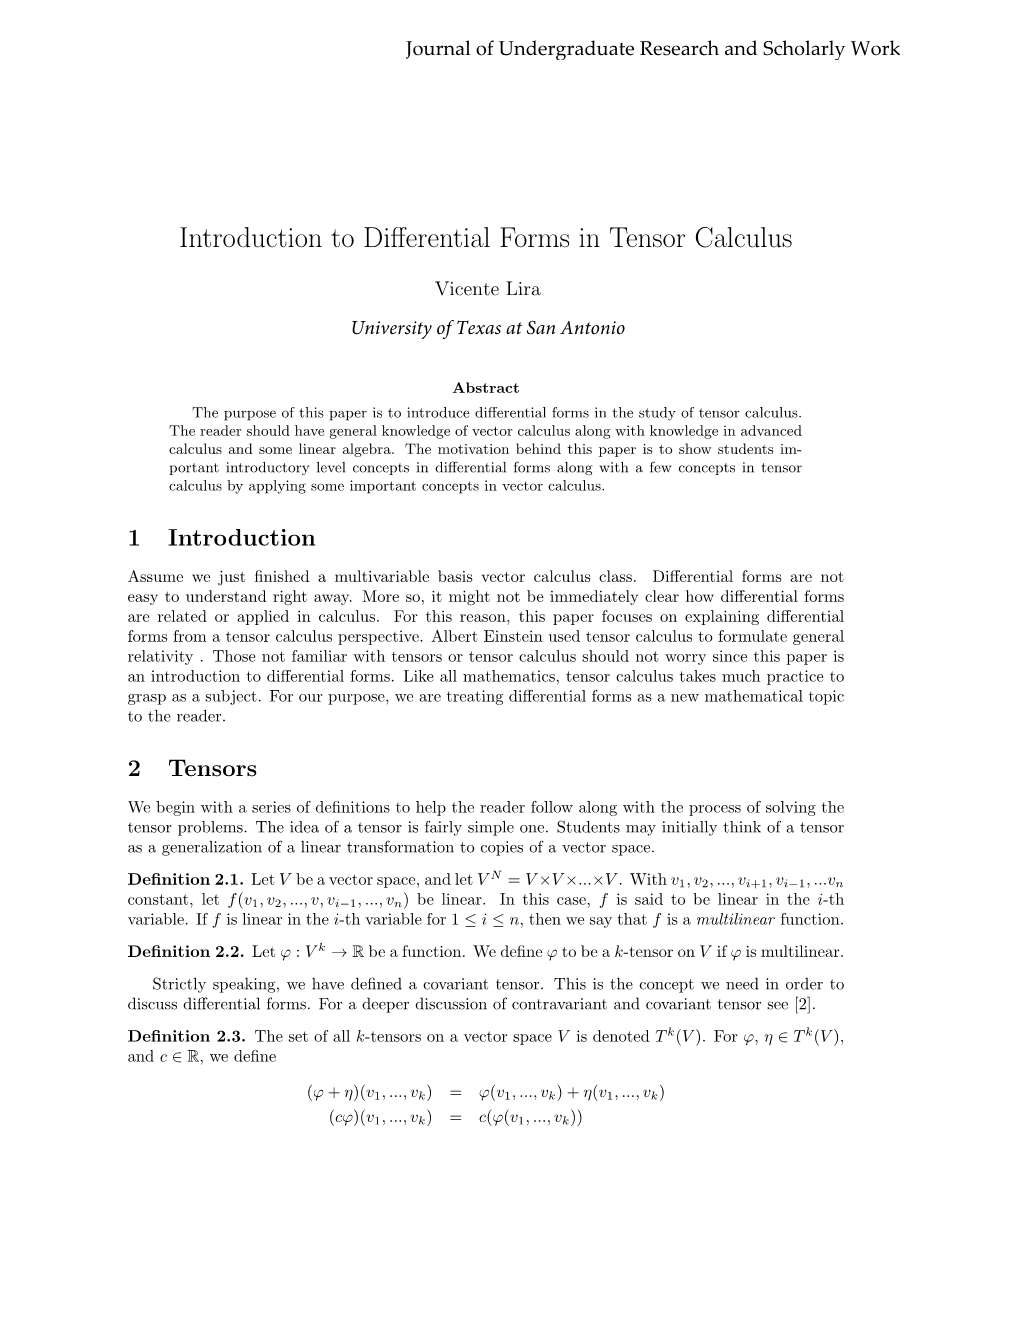 Introduction to Differential Forms in Tensor Calculus